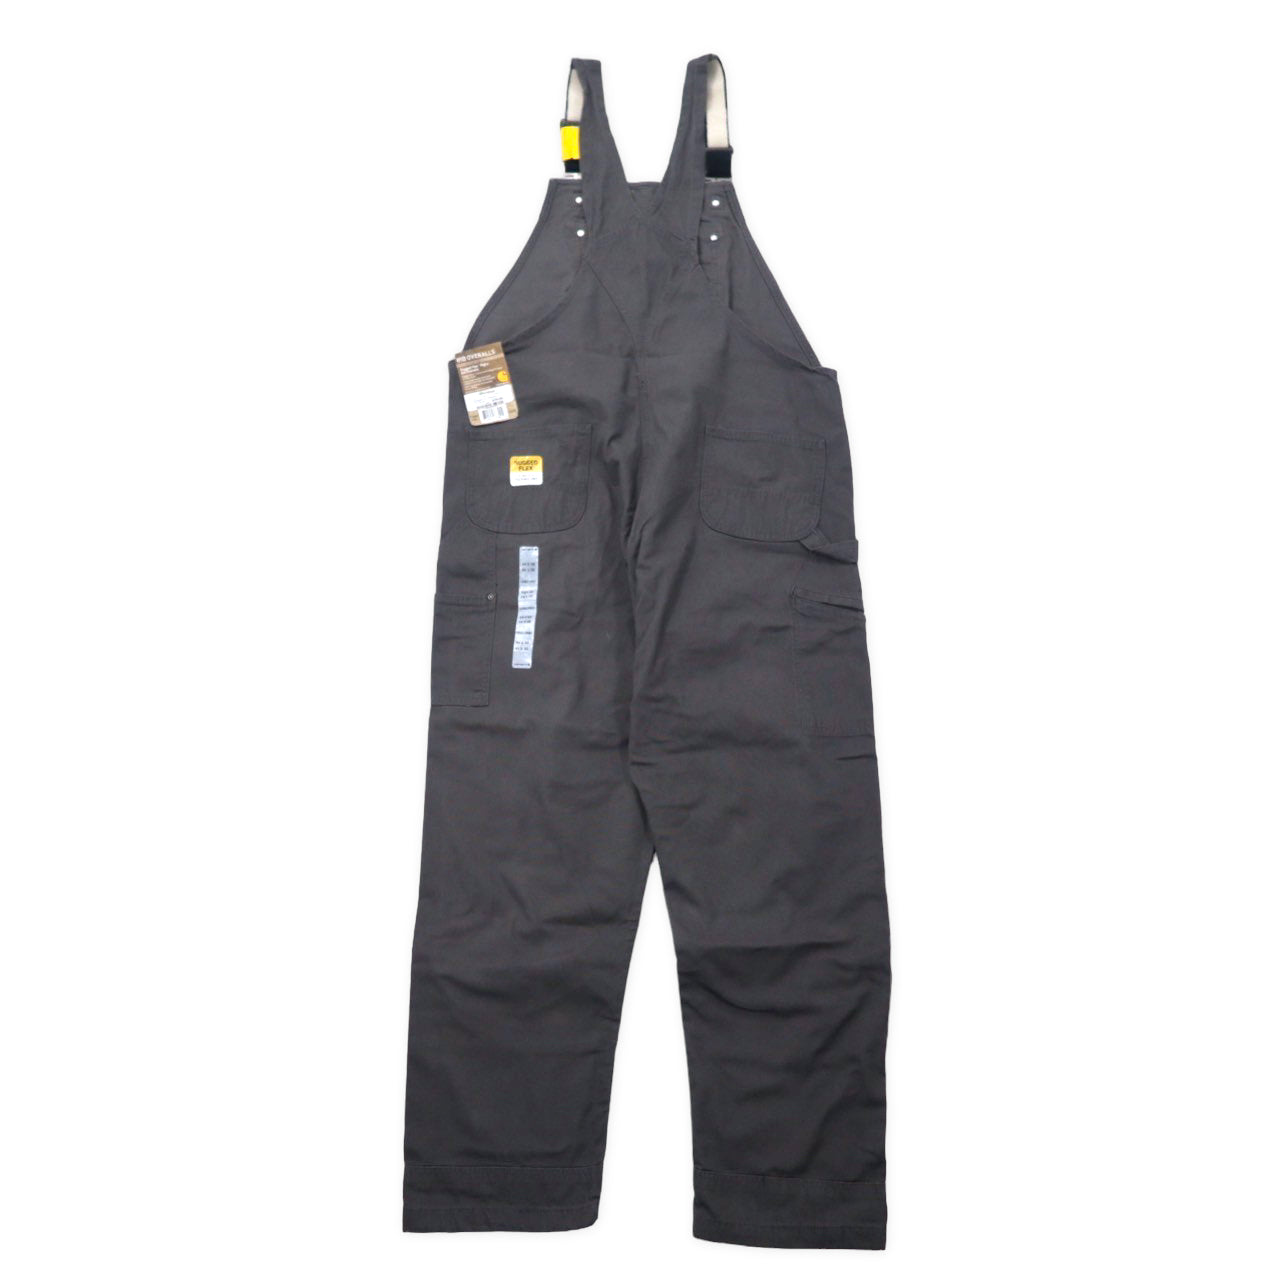 CARHARTT Double Ney Vib Overall 44 Gray Cotton Rugged Flex Rigby 